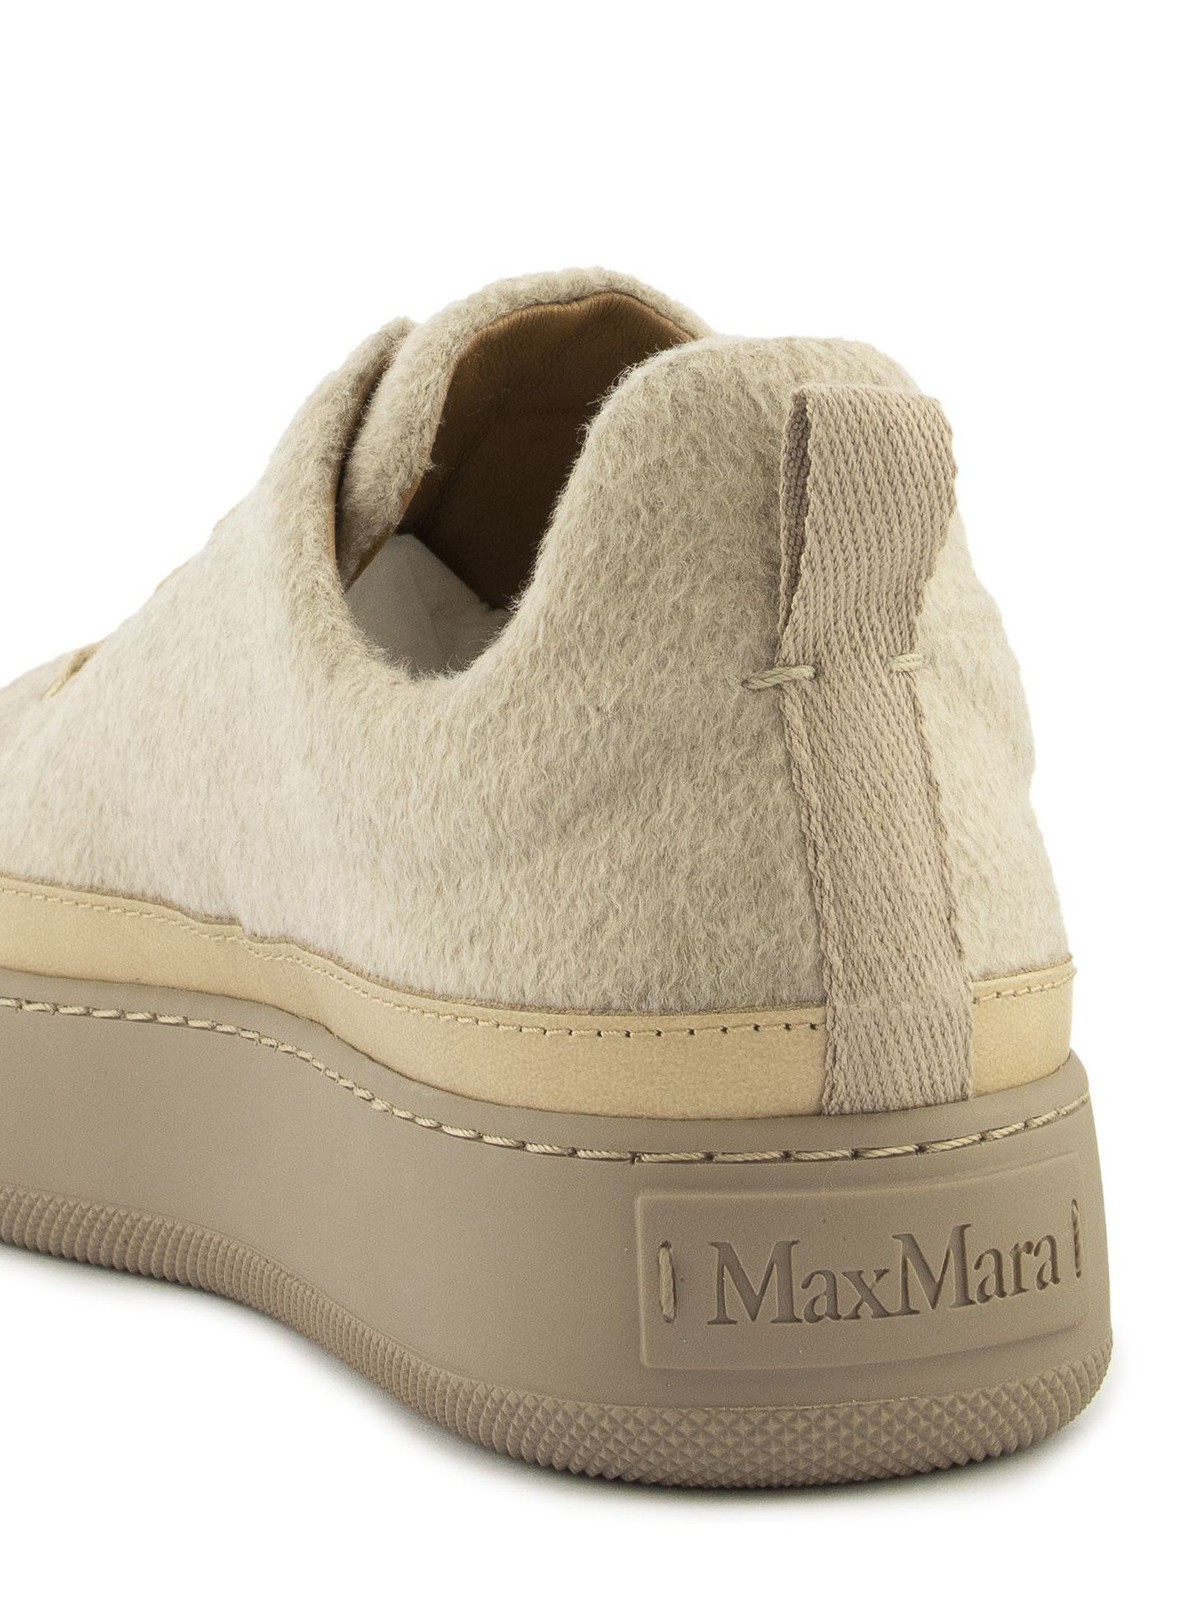 Trainers Max Mara - Tunny sneakers - 47660707600001 | Shop online 